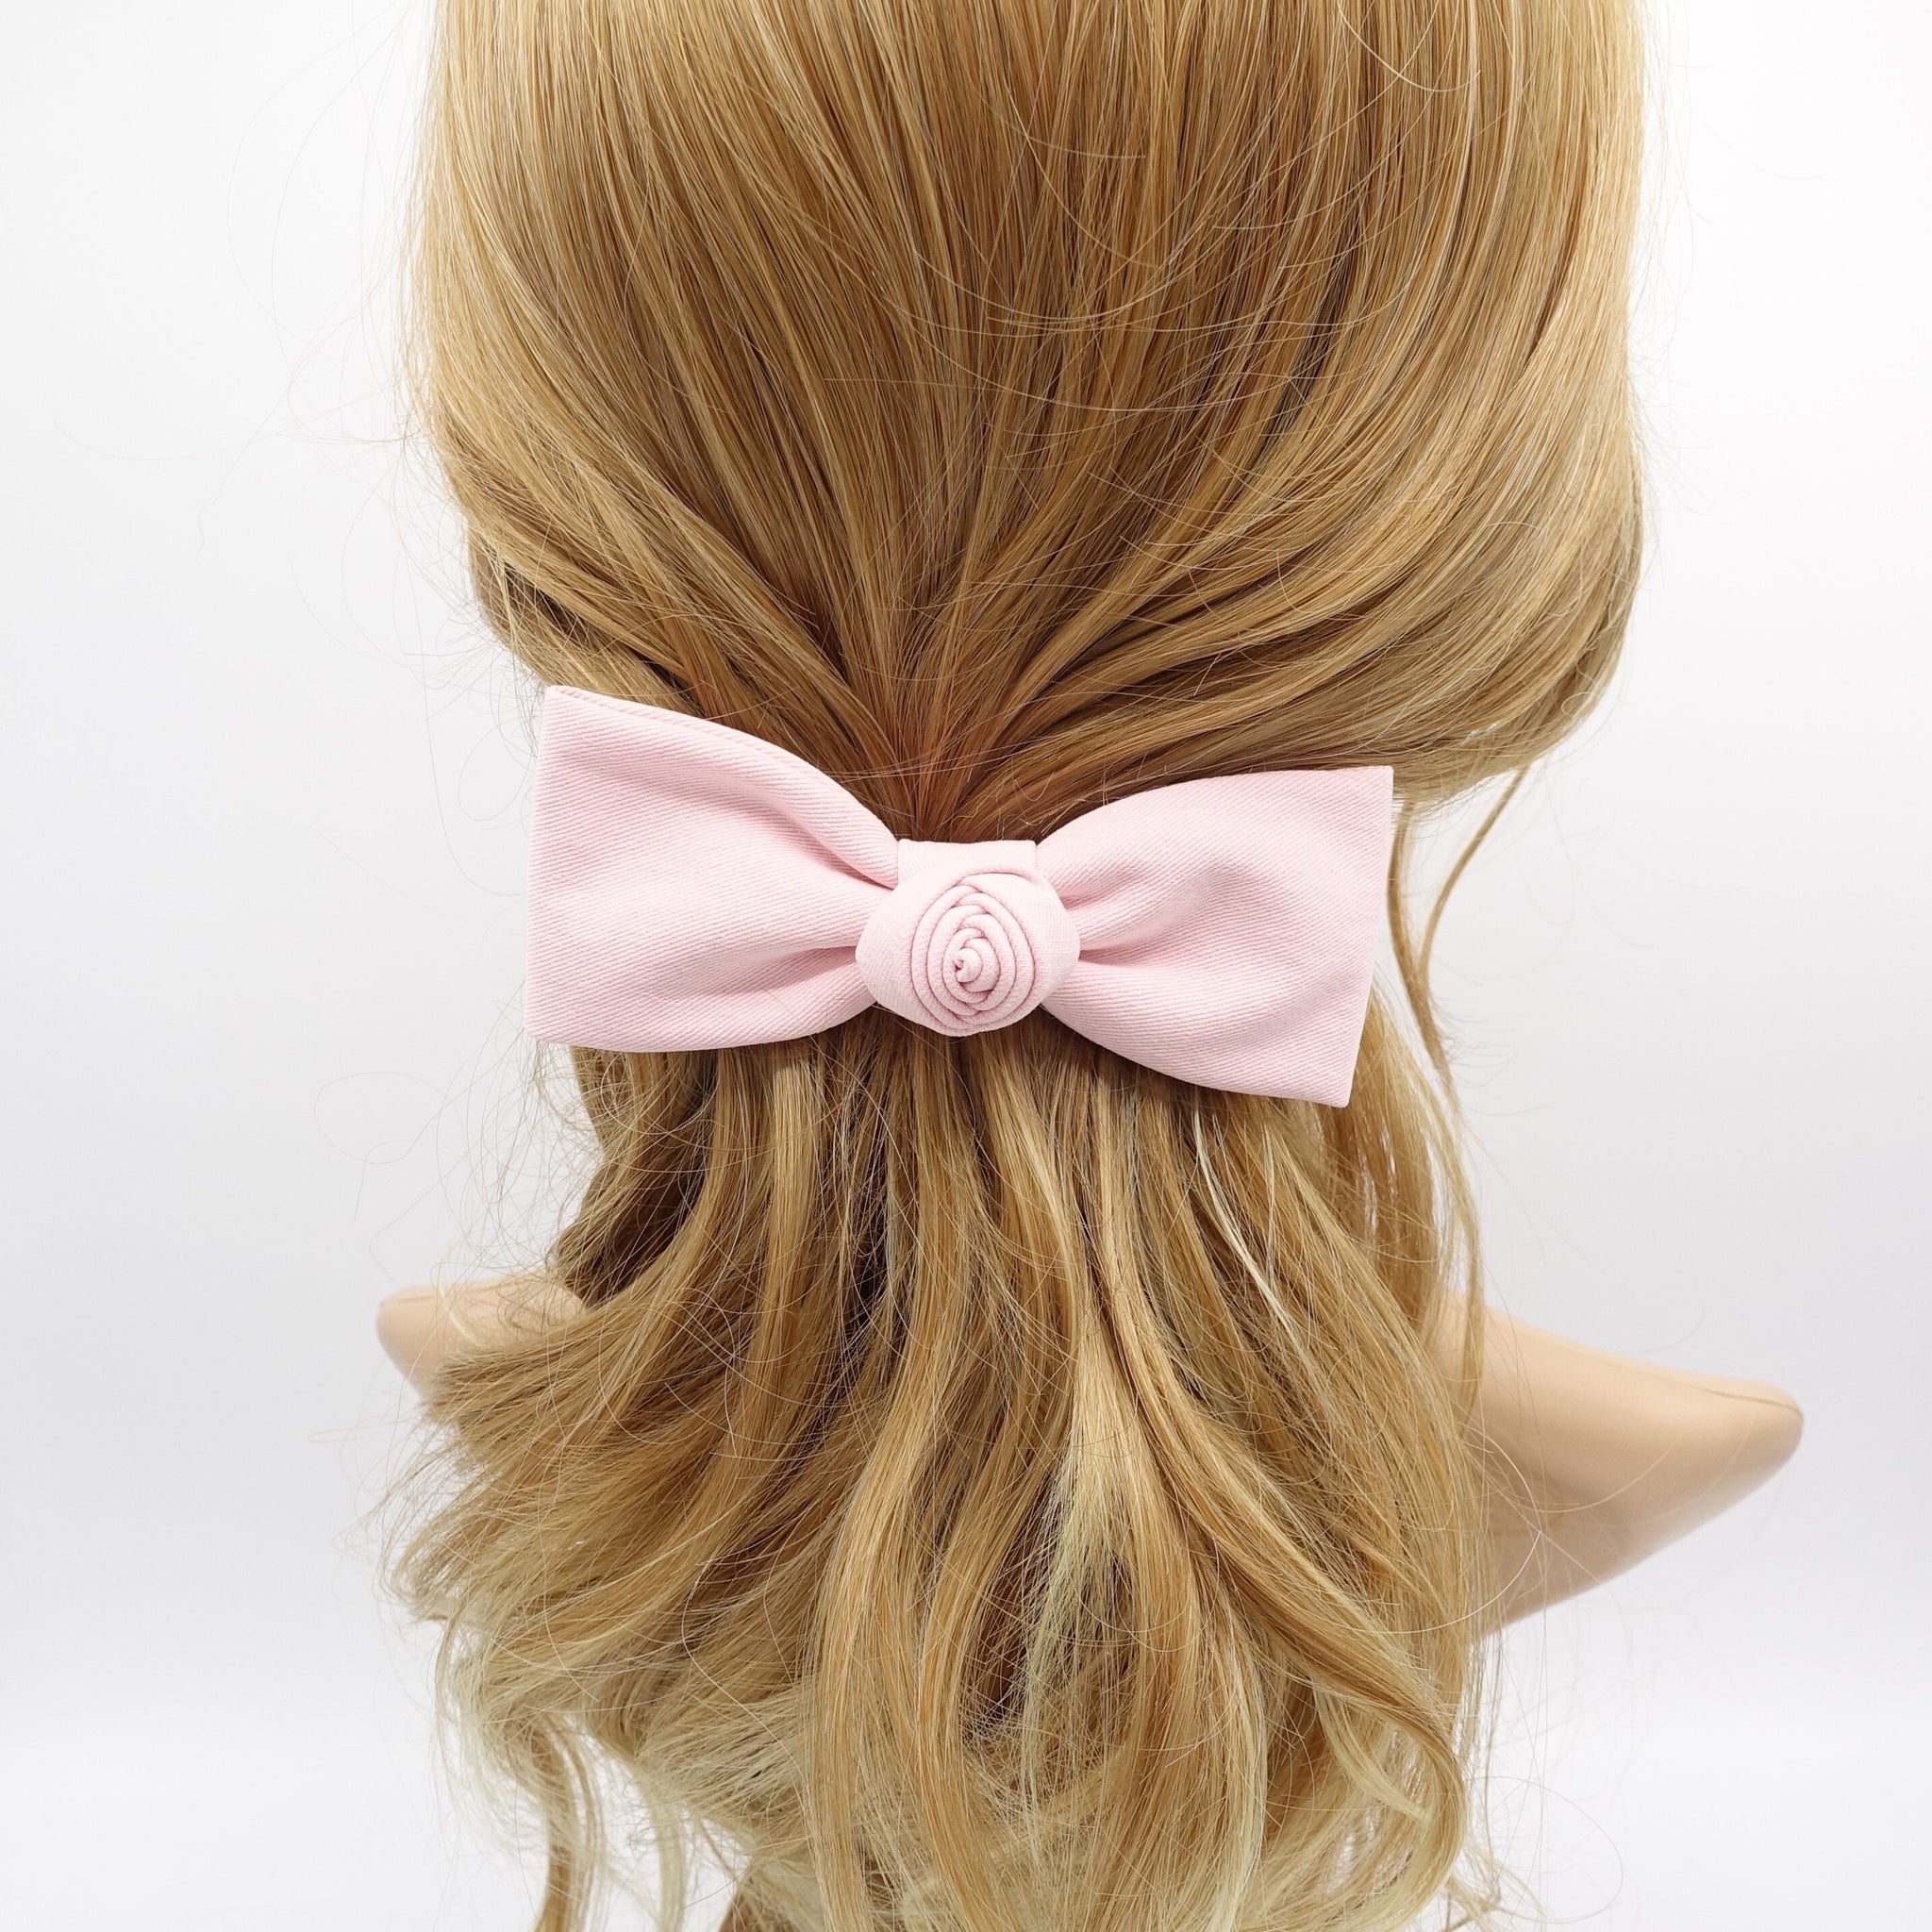 veryshine.com Barrette (Bow) Pink flower end hair bow, pastel hair bow for women